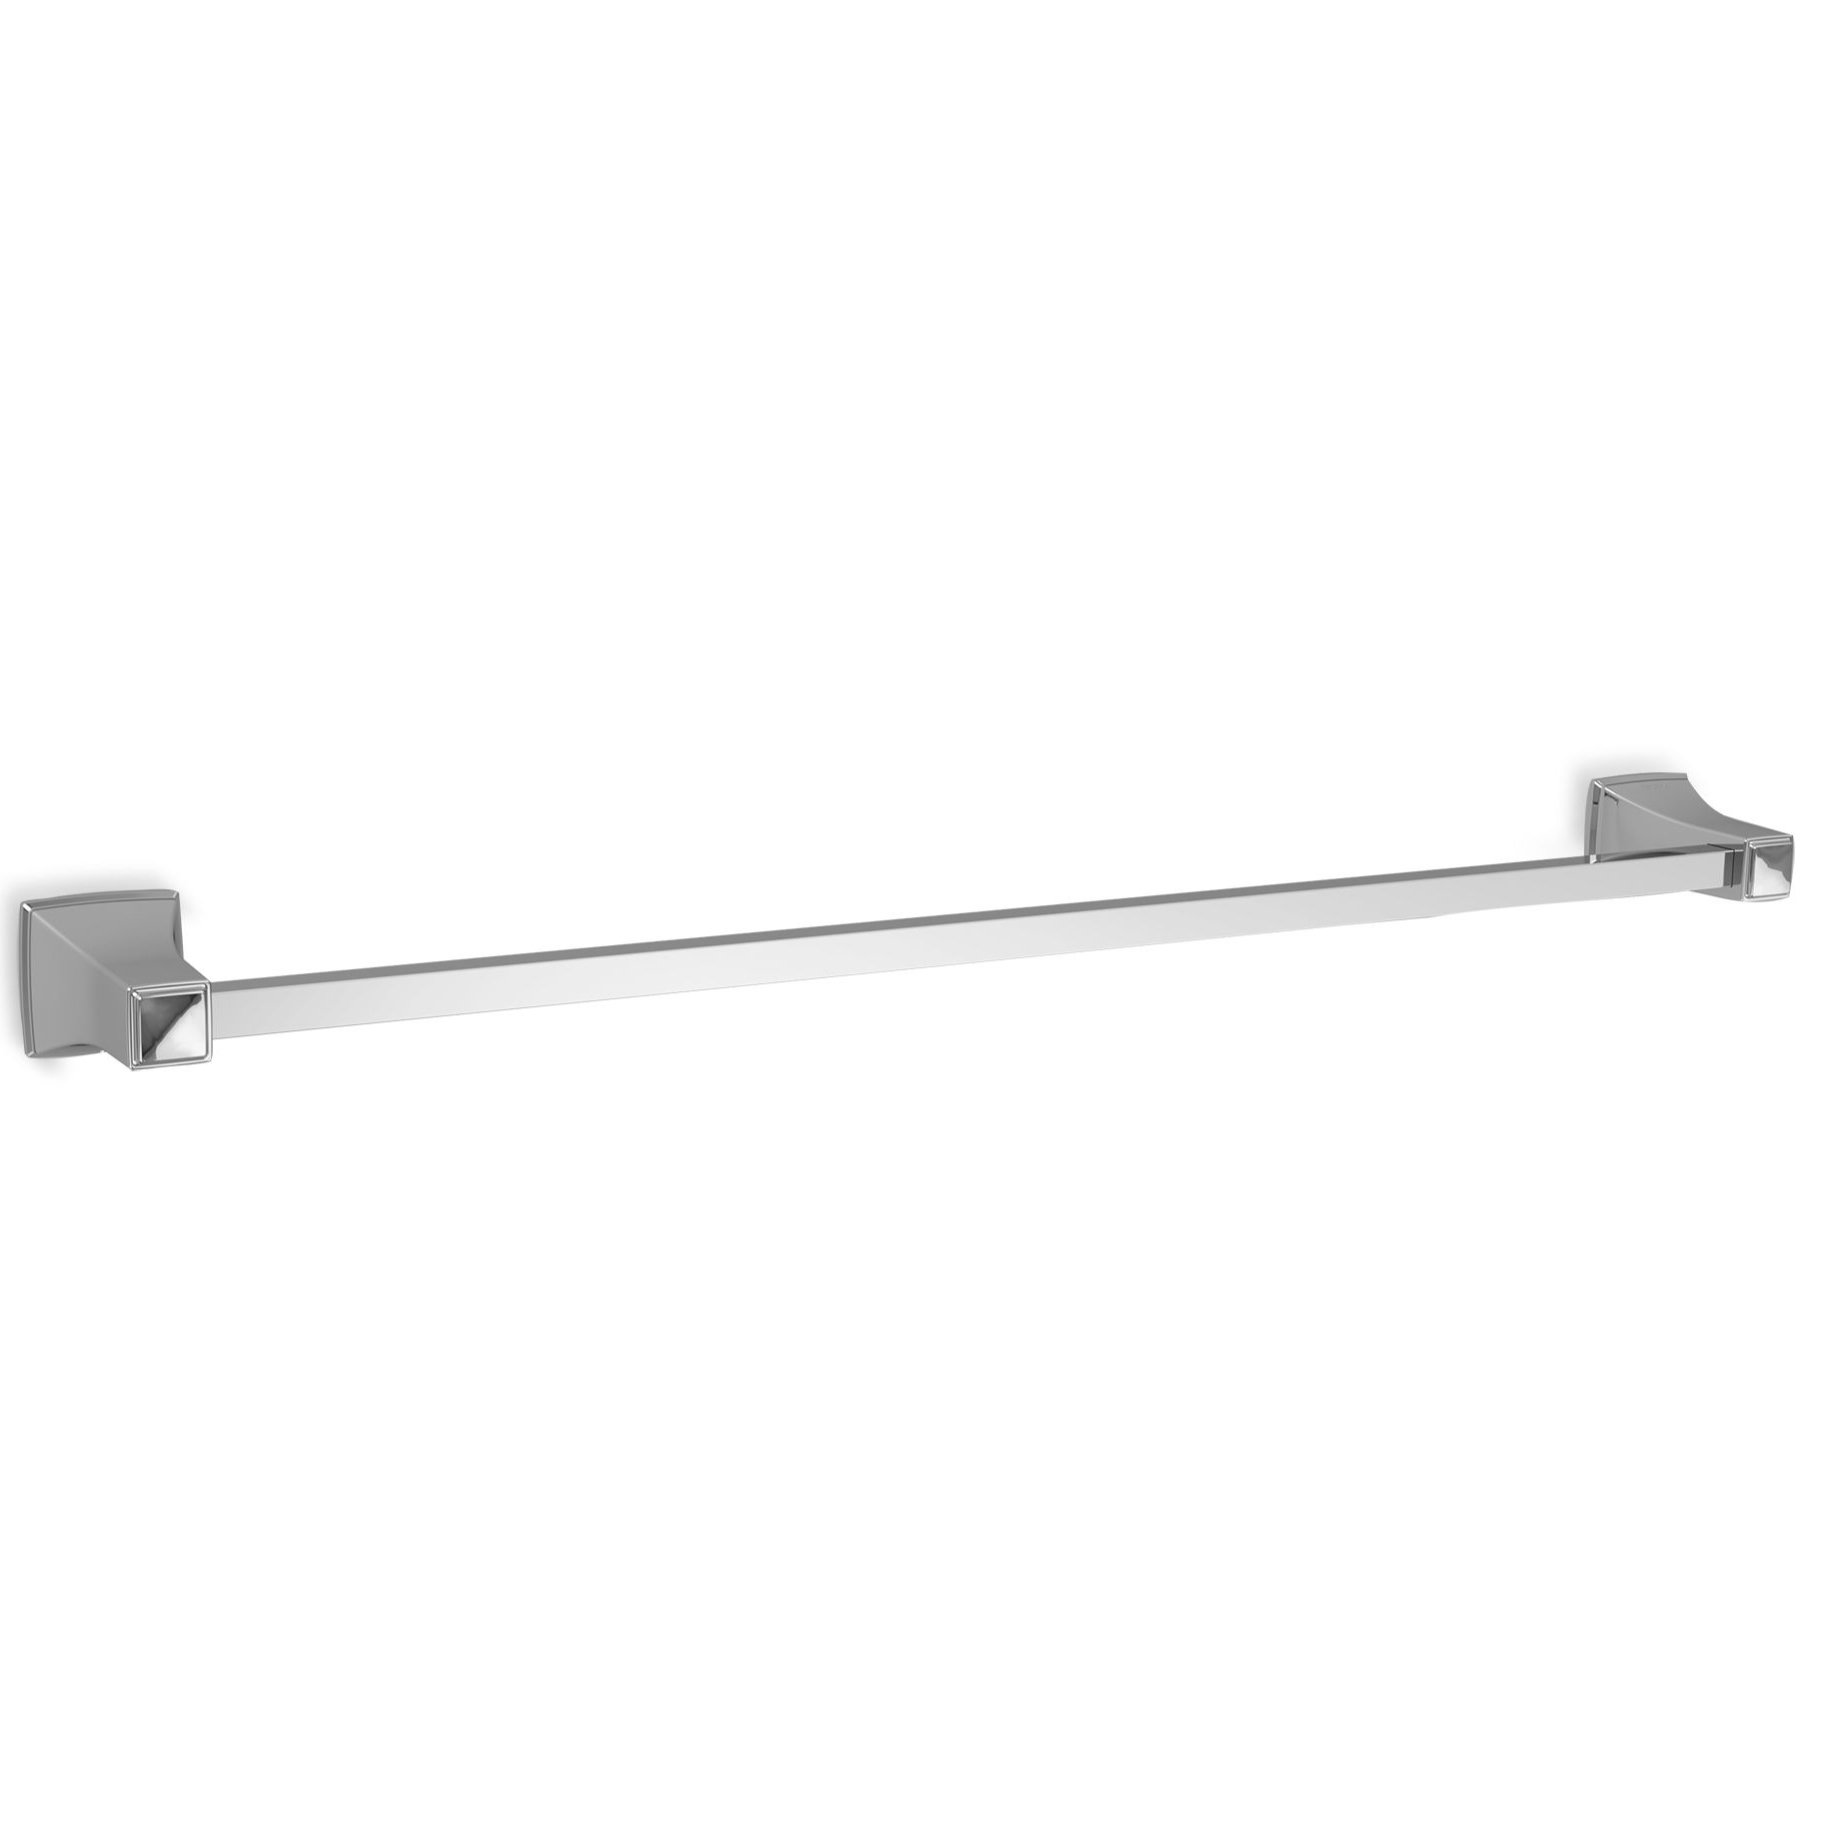 TOWEL BAR 30in YB30130#CP CLASSIC COLLECTION SERIES B